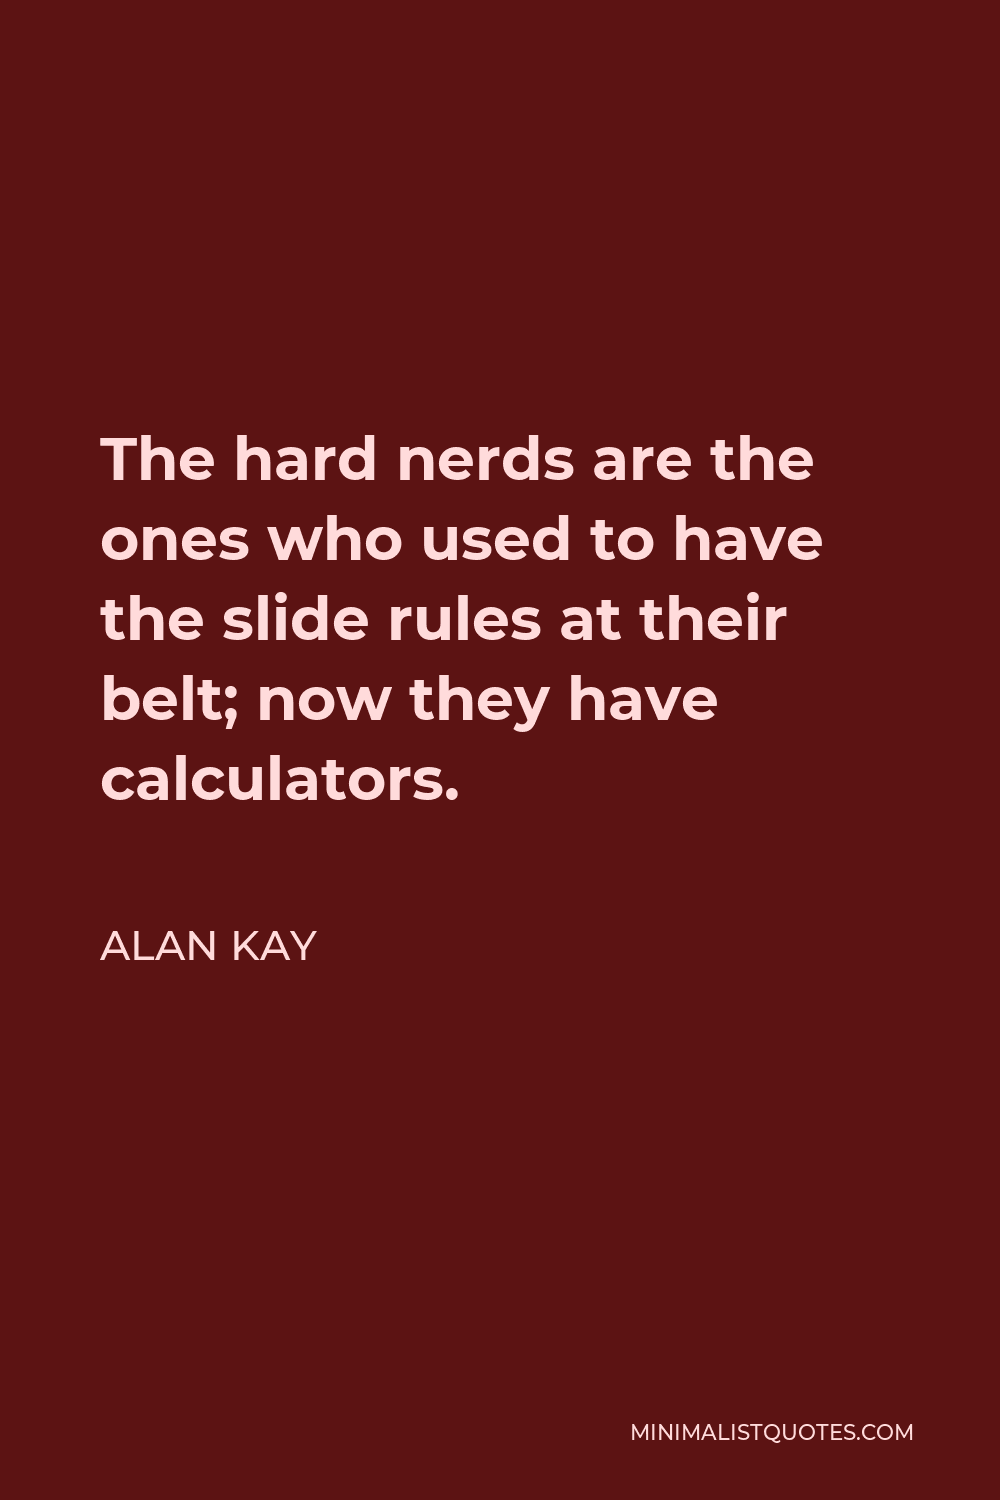 Alan Kay Quote - The hard nerds are the ones who used to have the slide rules at their belt; now they have calculators.